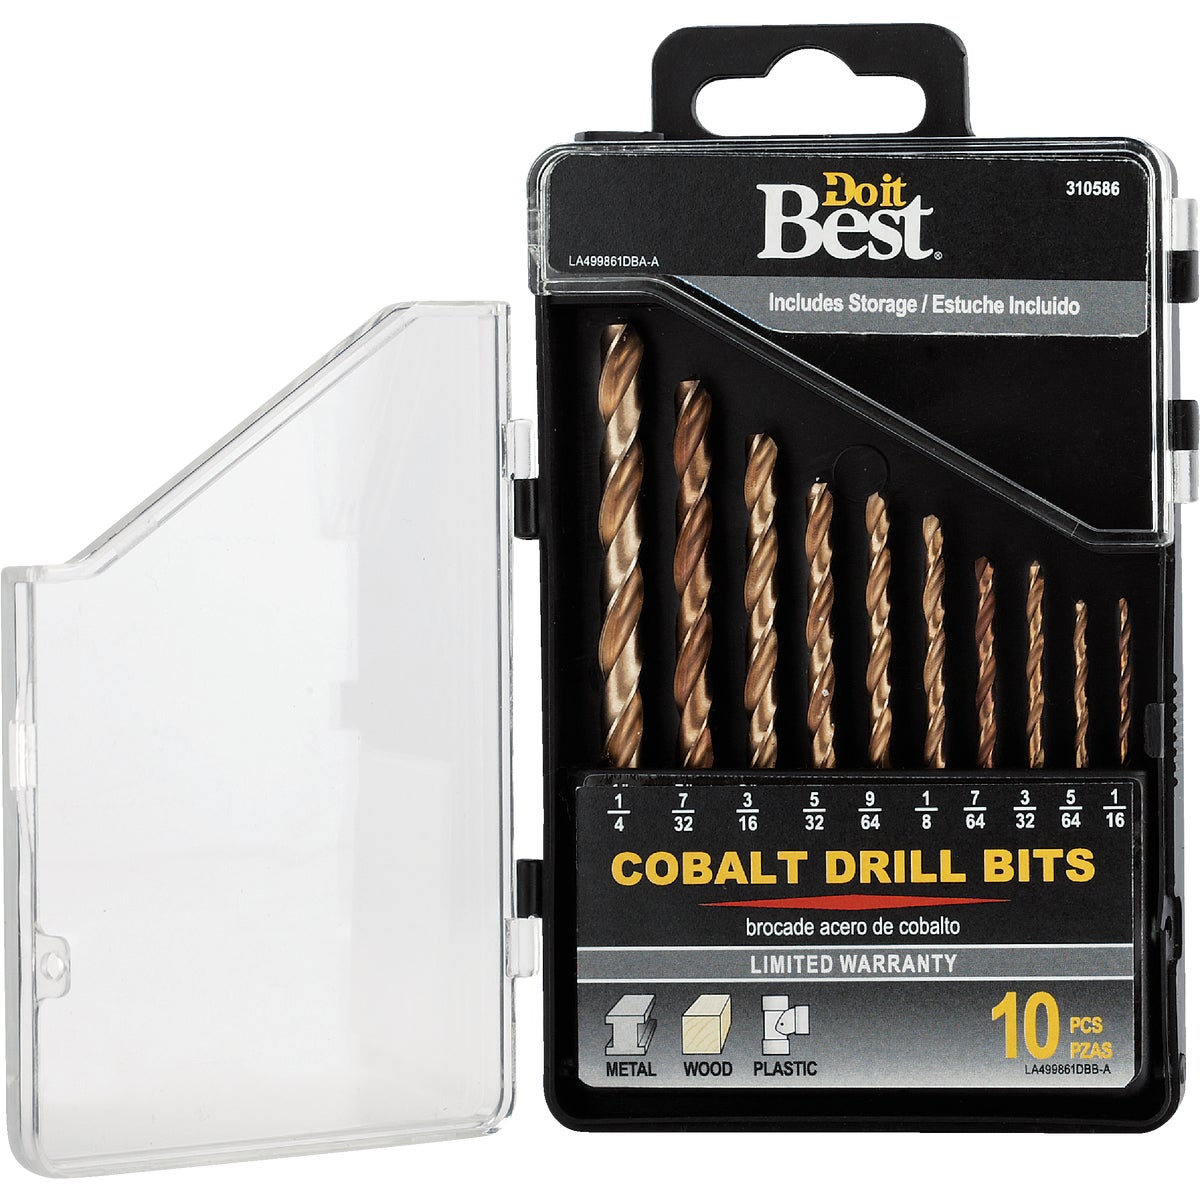 Item 310586, Cobalt bits for drilling into hard surfaces like stainless steel.